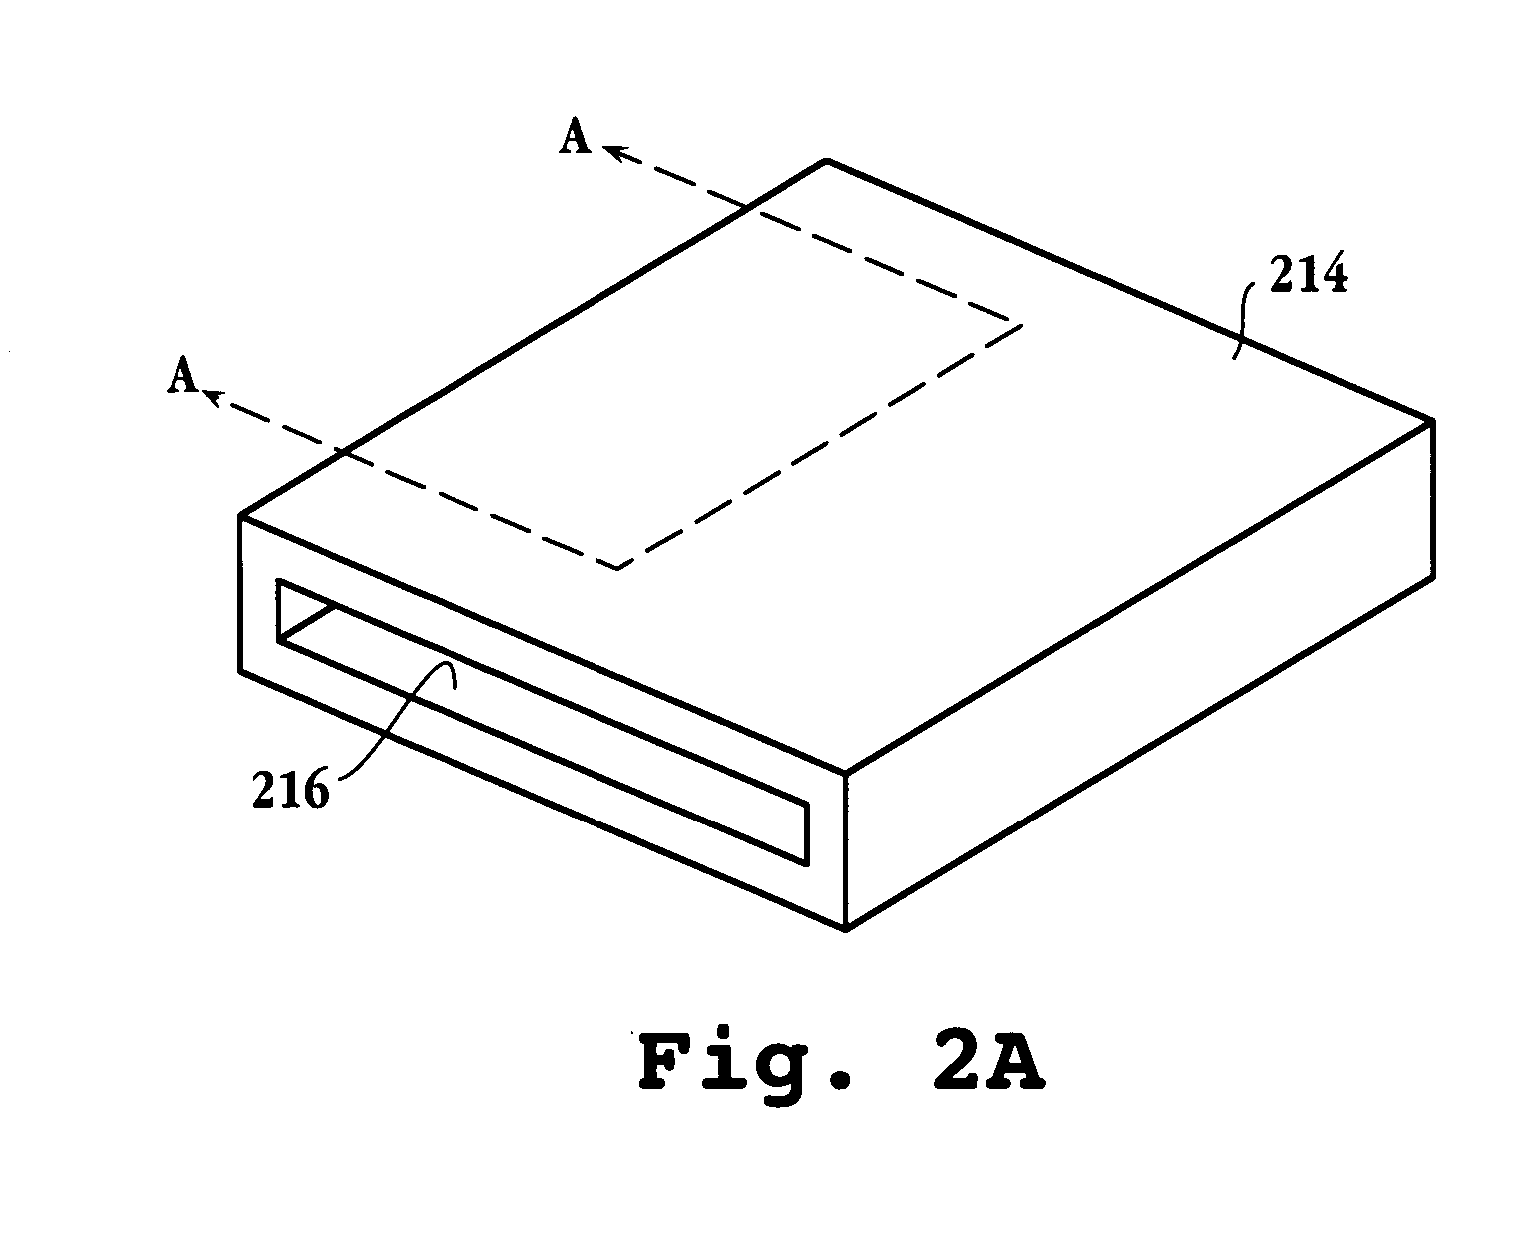 Method and apparatus for transporting a substrate using non-Newtonian fluid